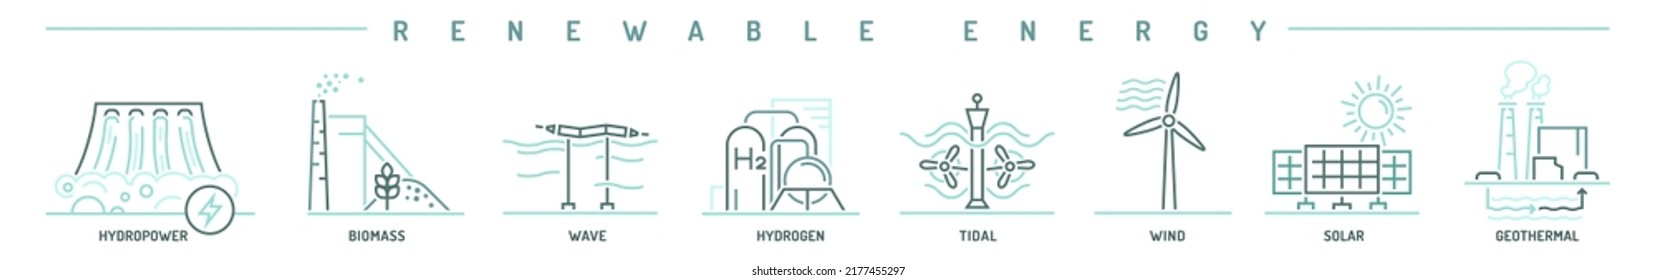 Renewable energy types. Electricity generation ecological sources. Solar, water, fossil, wind, hydrogen, wave, tidal, thermal, geothermal and biomass. Editable vector illustration